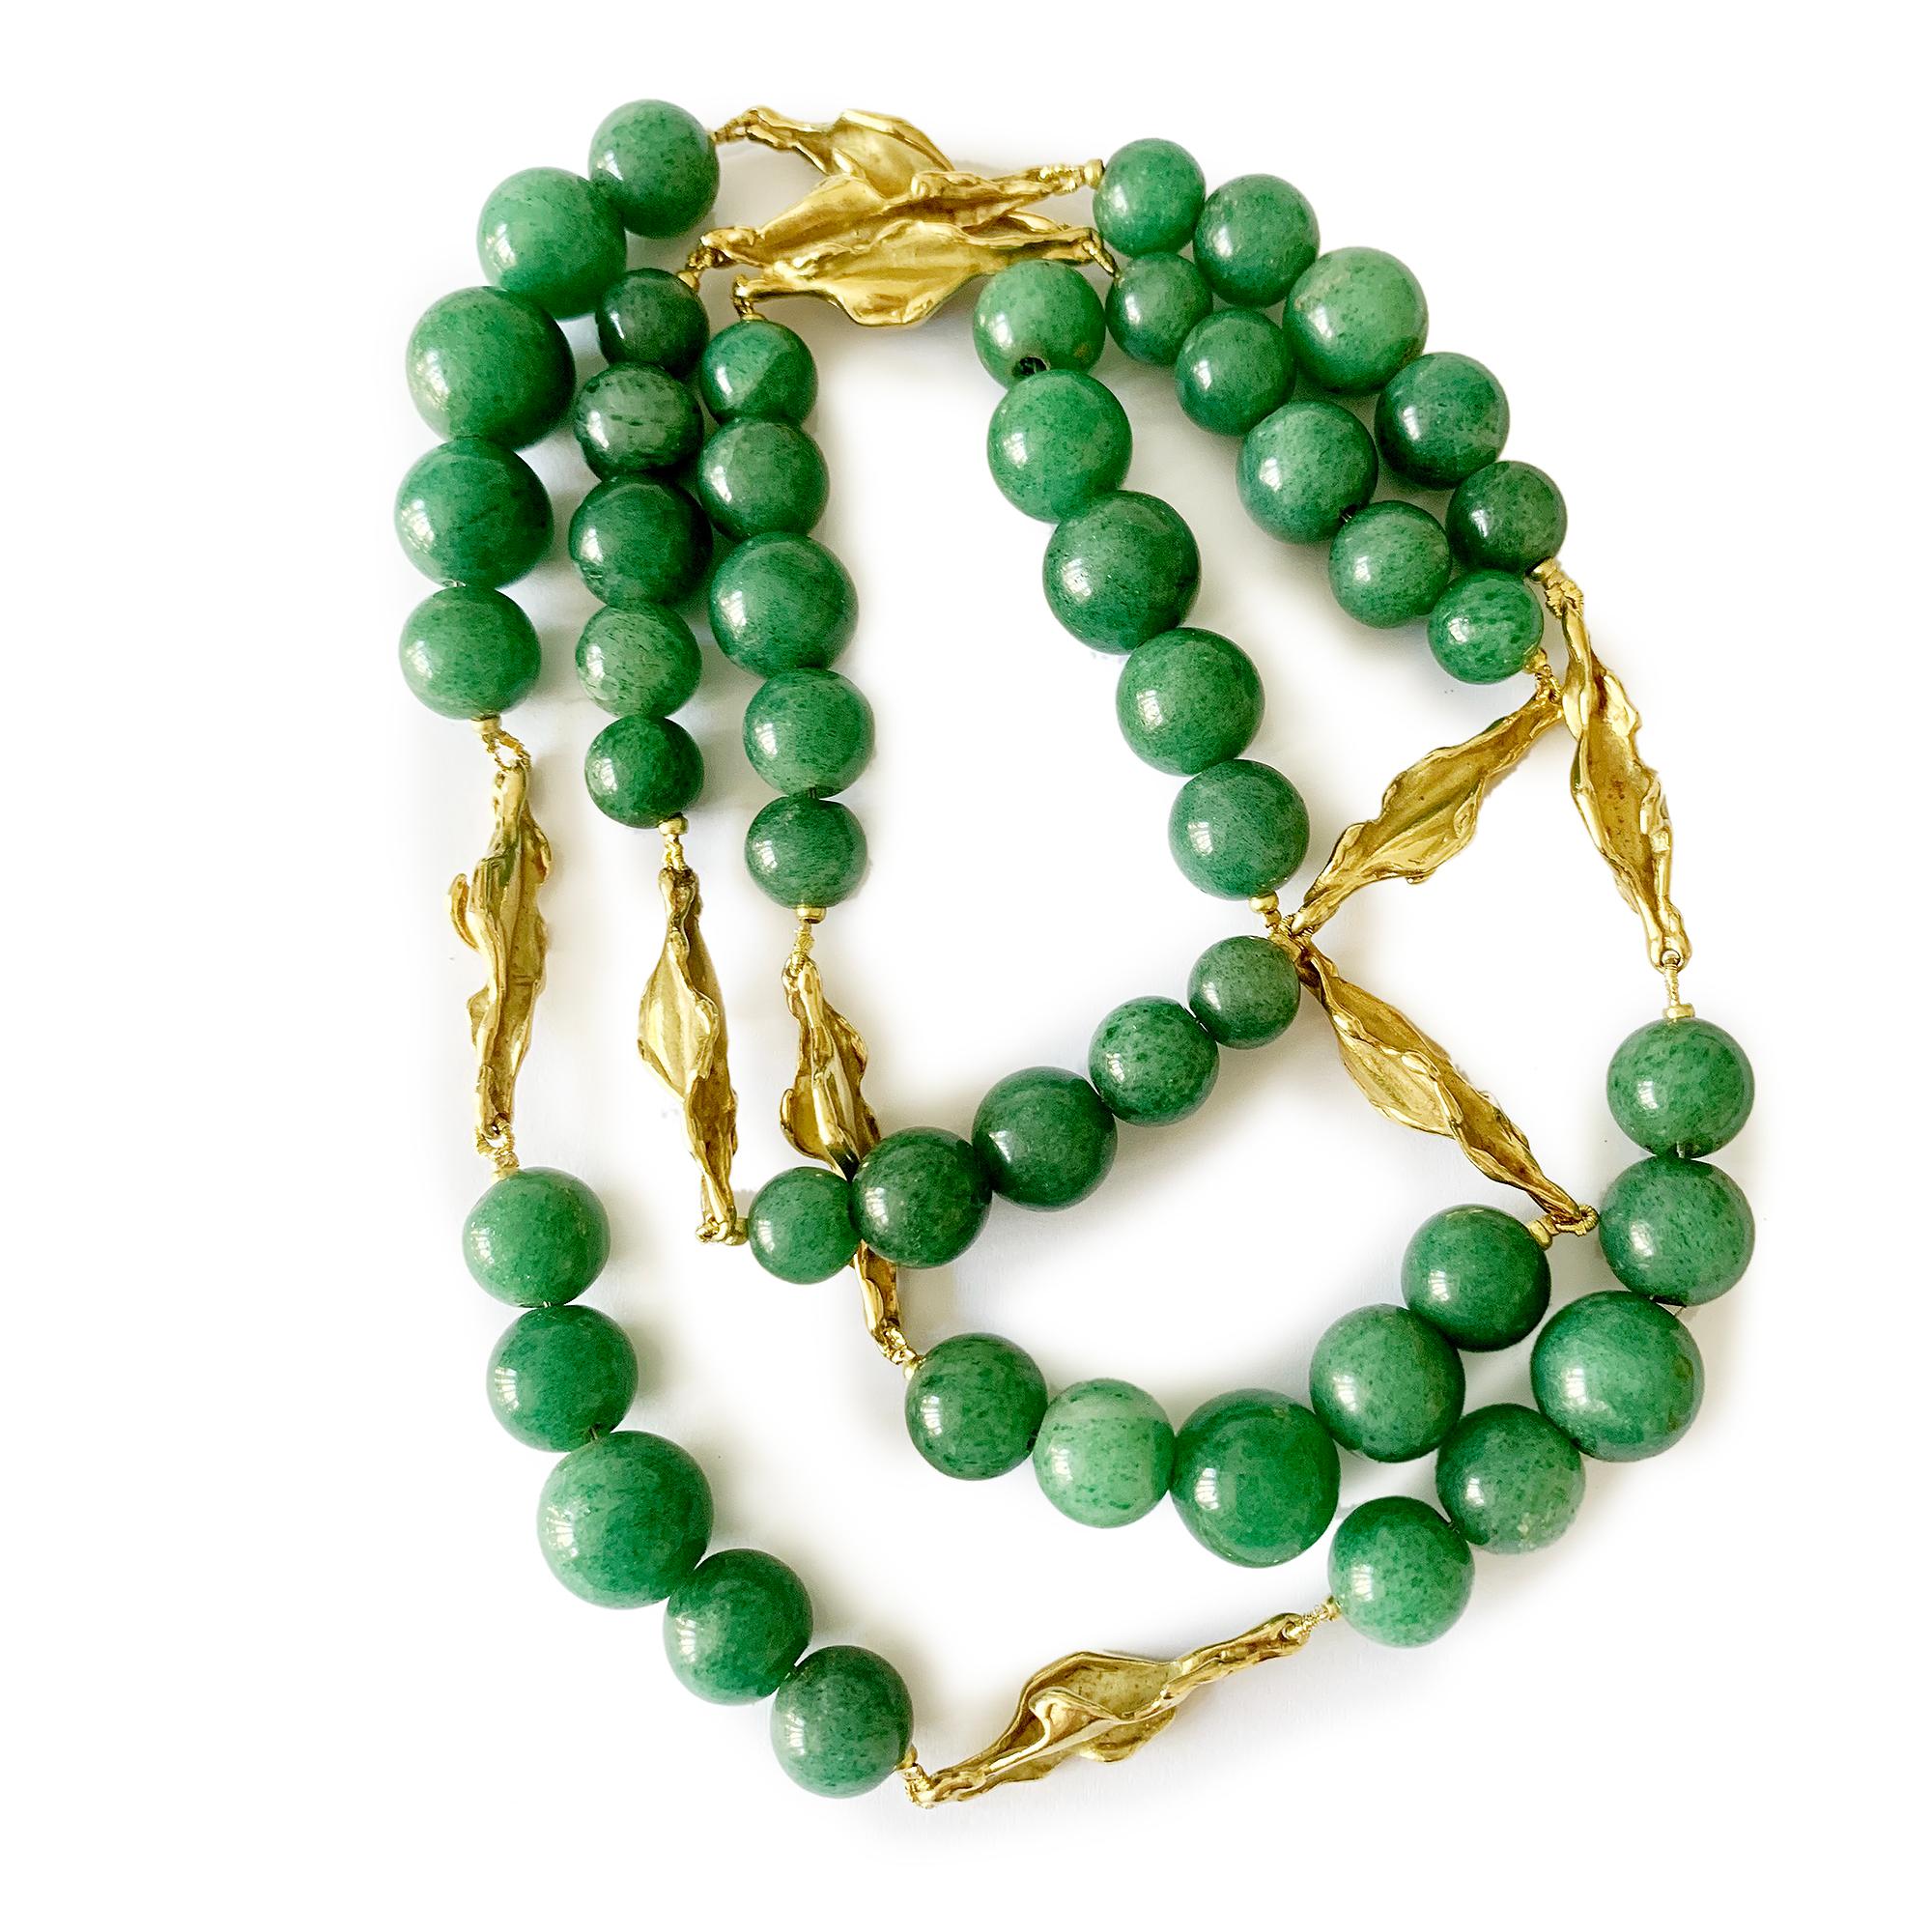 Elegant necklace in green aventurine and 18 karat yellow gold.

50 balls of green aventurine from 13.5 to 11 mm diameter interspersed with elongated 18 karat yellow gold nuggets

The green aventurine owes its color to the inclusions of fuschite in